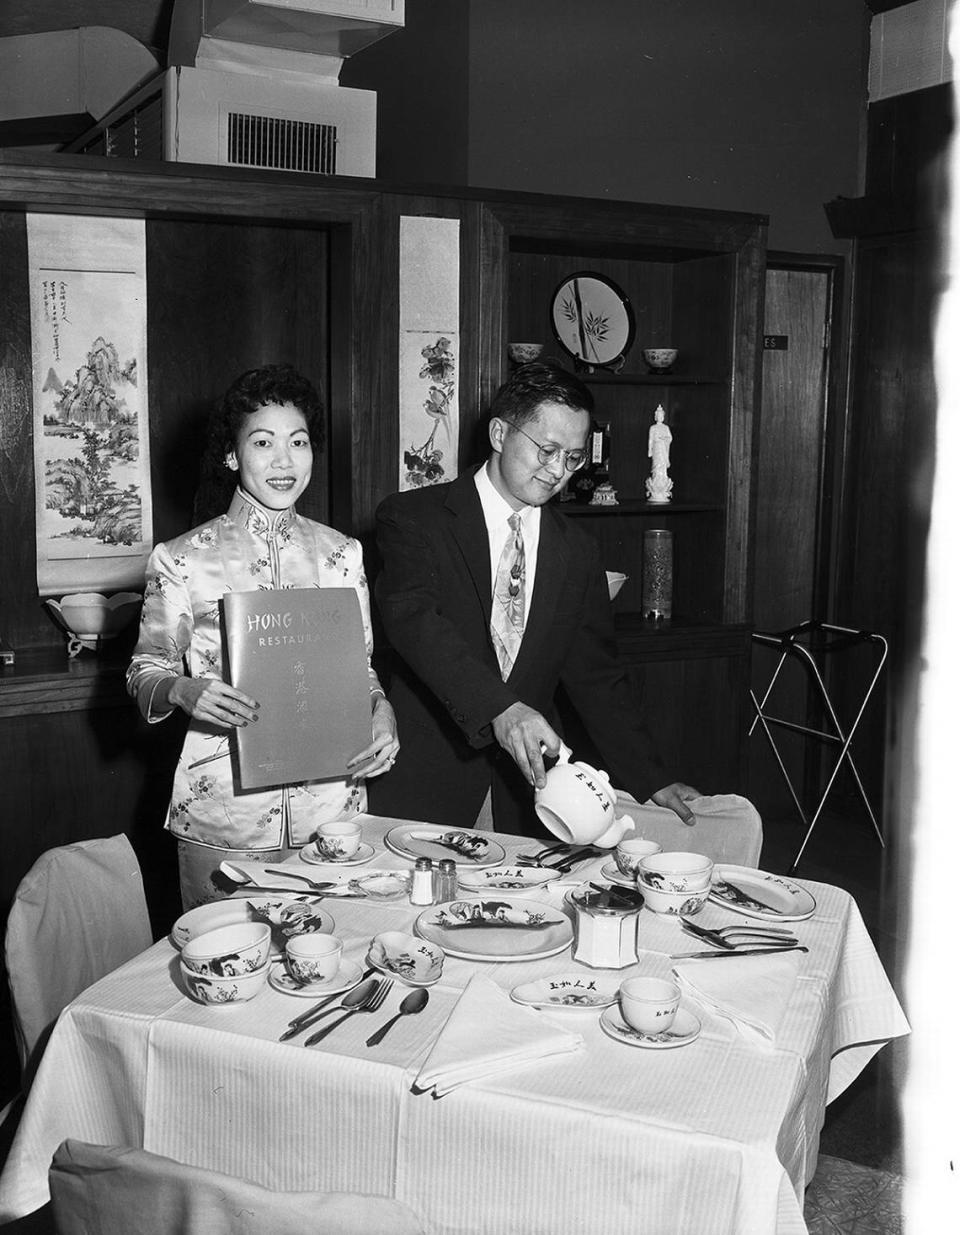 March 26, 1959: Walter and Frances Eng, opening their Hong Kong Restaurant on Blue Bonnet Circle off South University Drive in Fort Worth. Walter, who was born in Canton, China, came to Fort Worth in 1932. The restaurant business ran in his family.